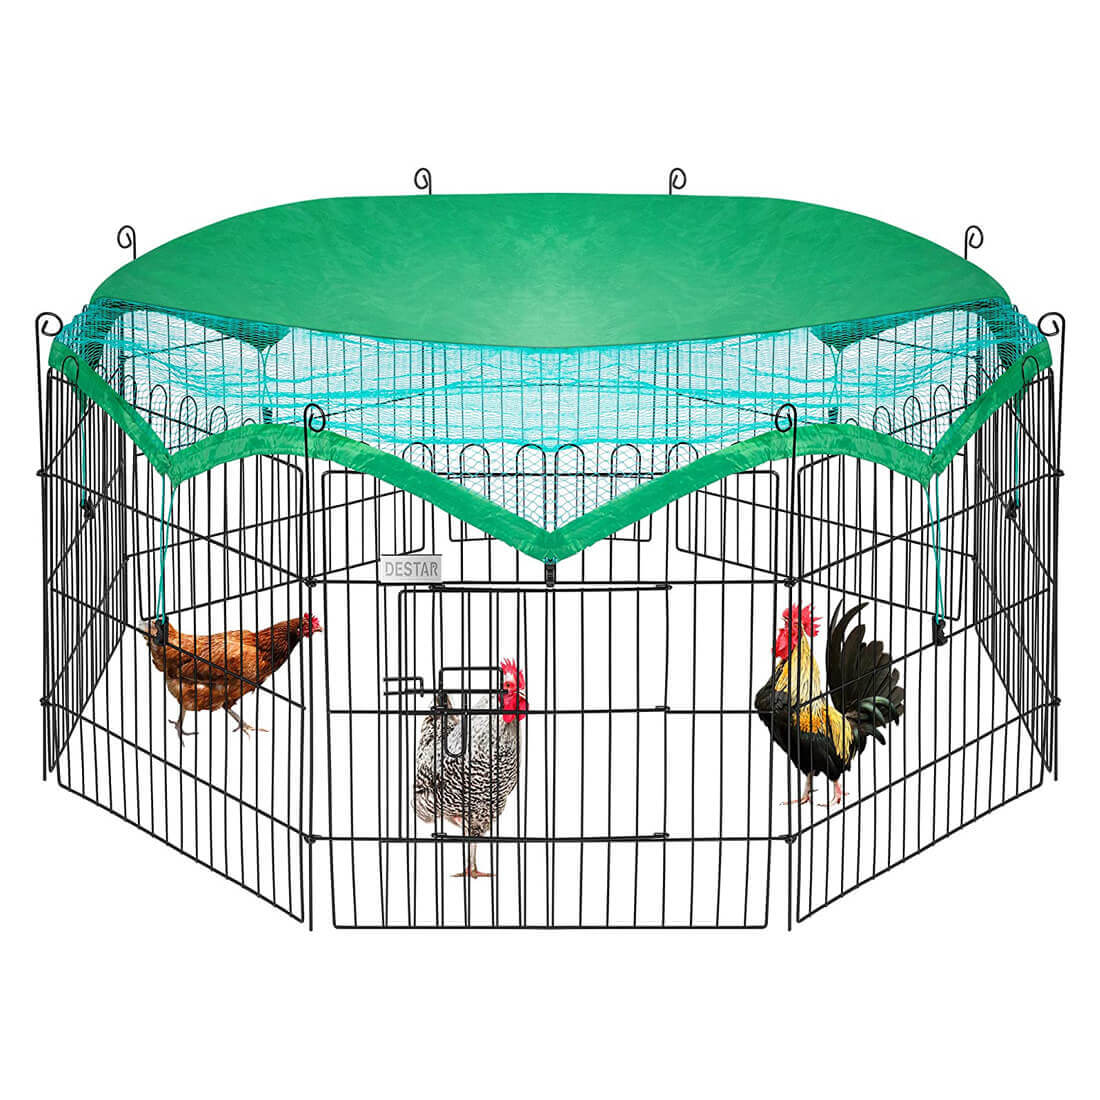 Chicken Kennel Rabbit Exercise Enclosure Outdoor Pet Play Pen Puppy Dog Cat Cage 